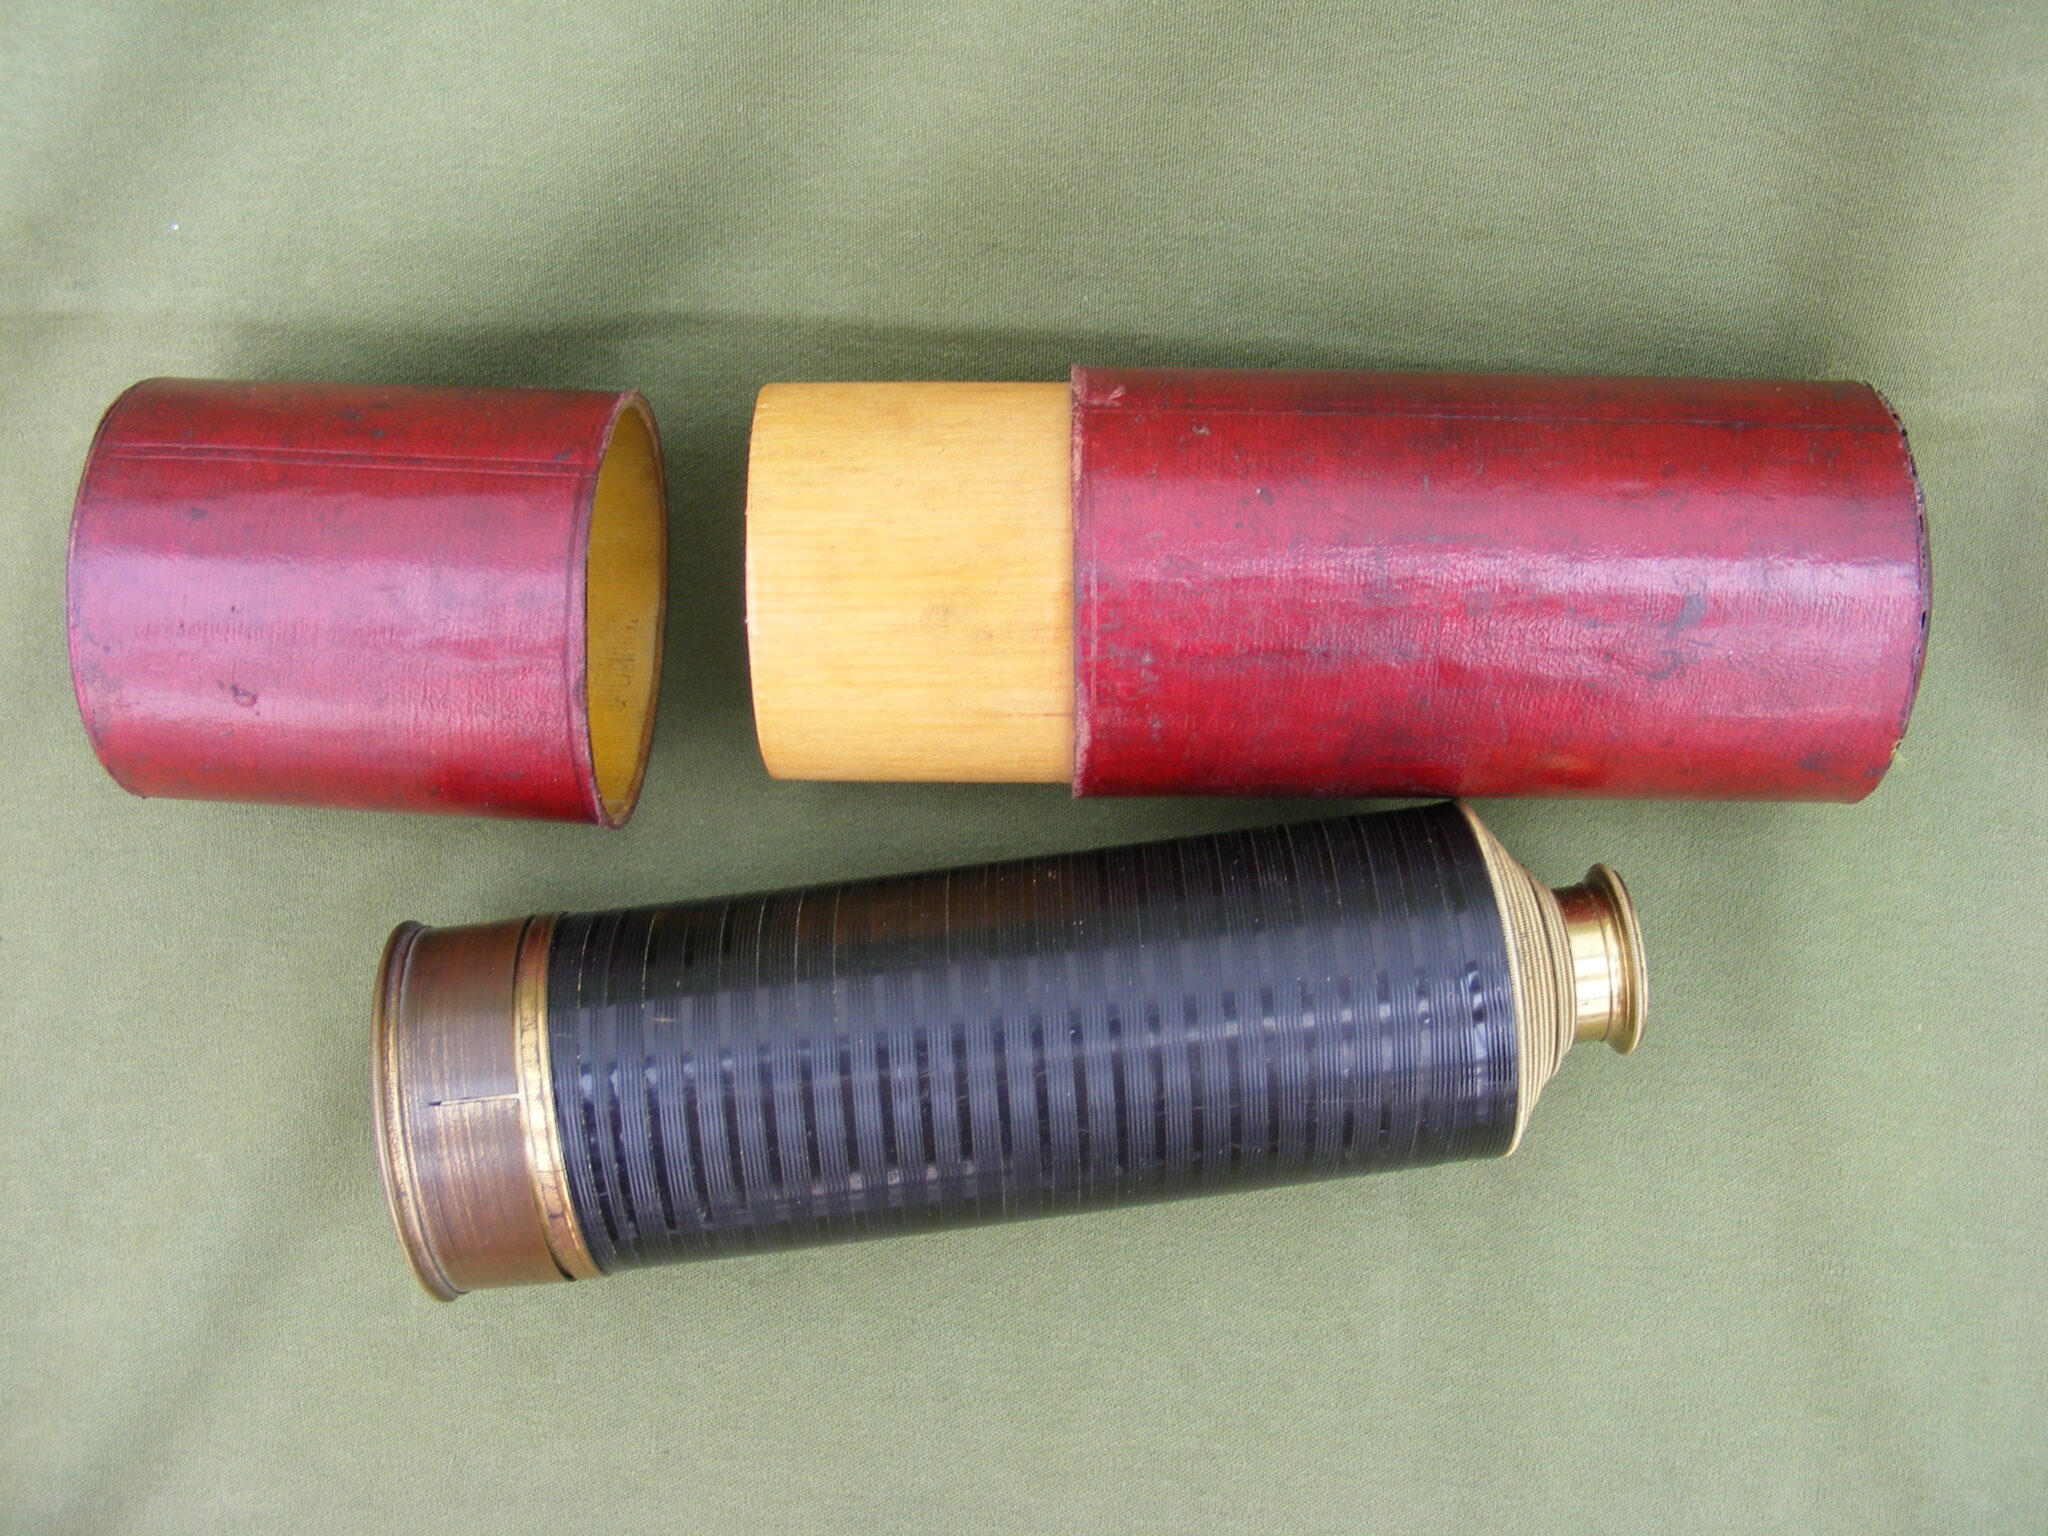 NINE DRAW ENGLISH TELESCOPE BY EDWARD G. WOOD. LONDON WITH RED MOROCCO SLIP CASE